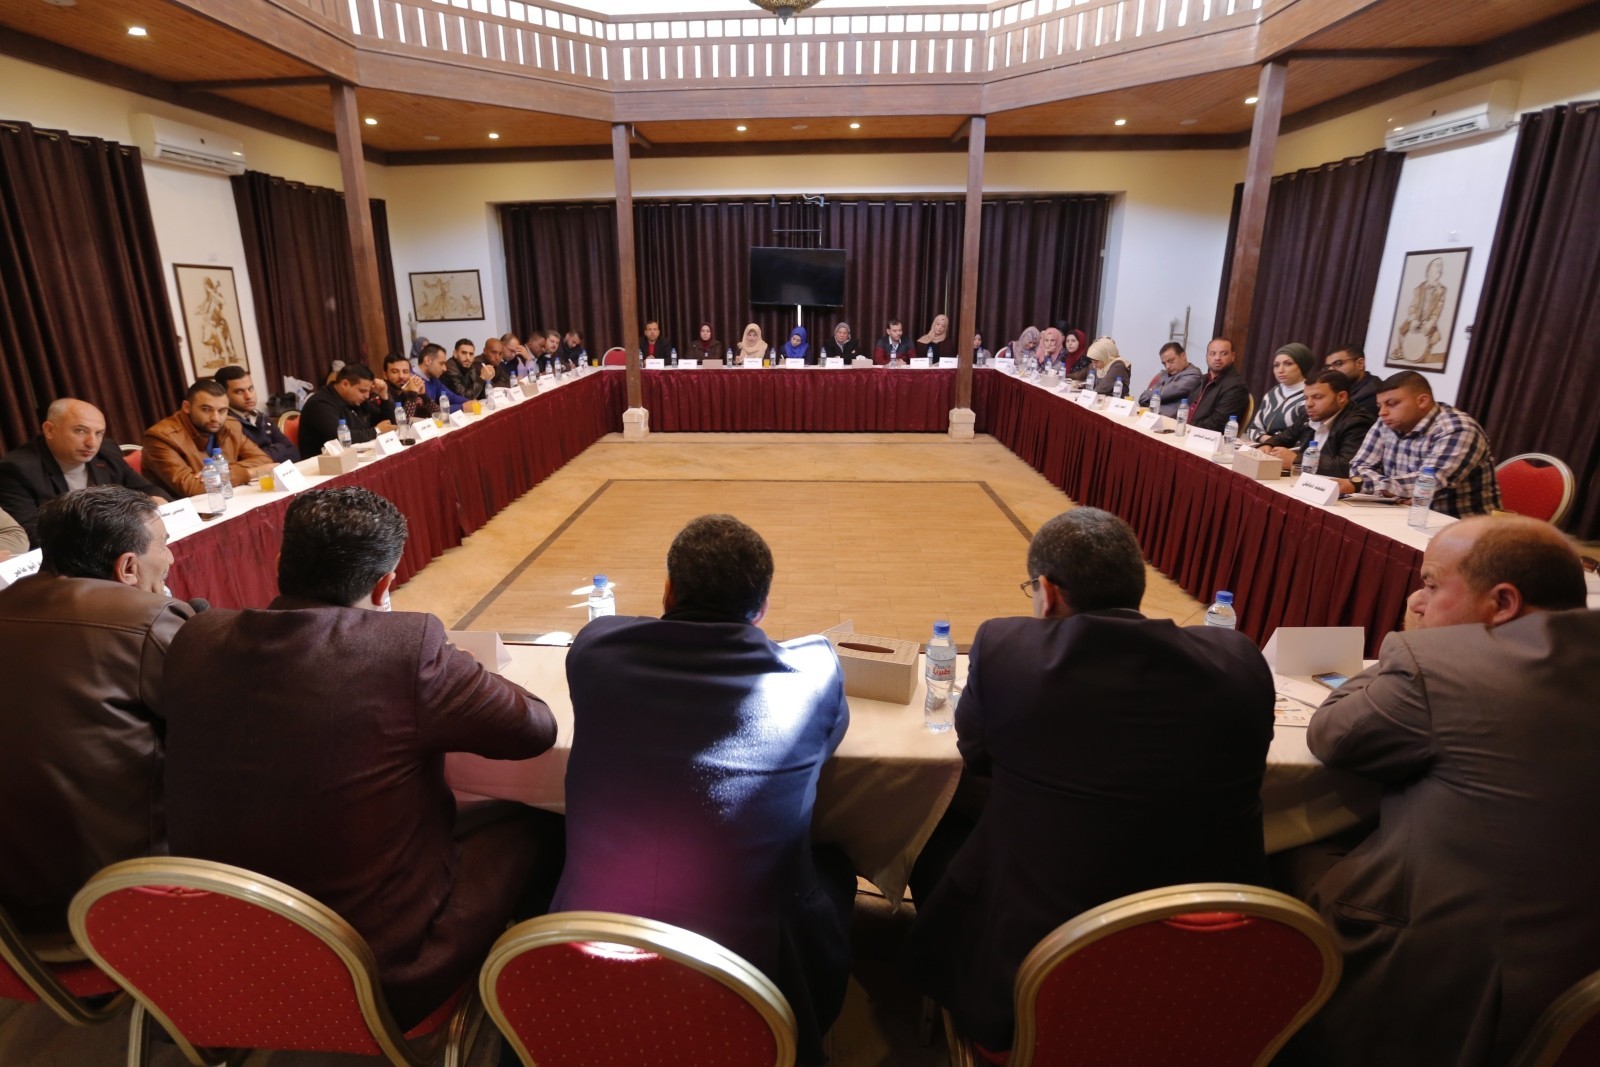 Press House holds a round-table on " Freedom of Expression is a Right and Responsibility"